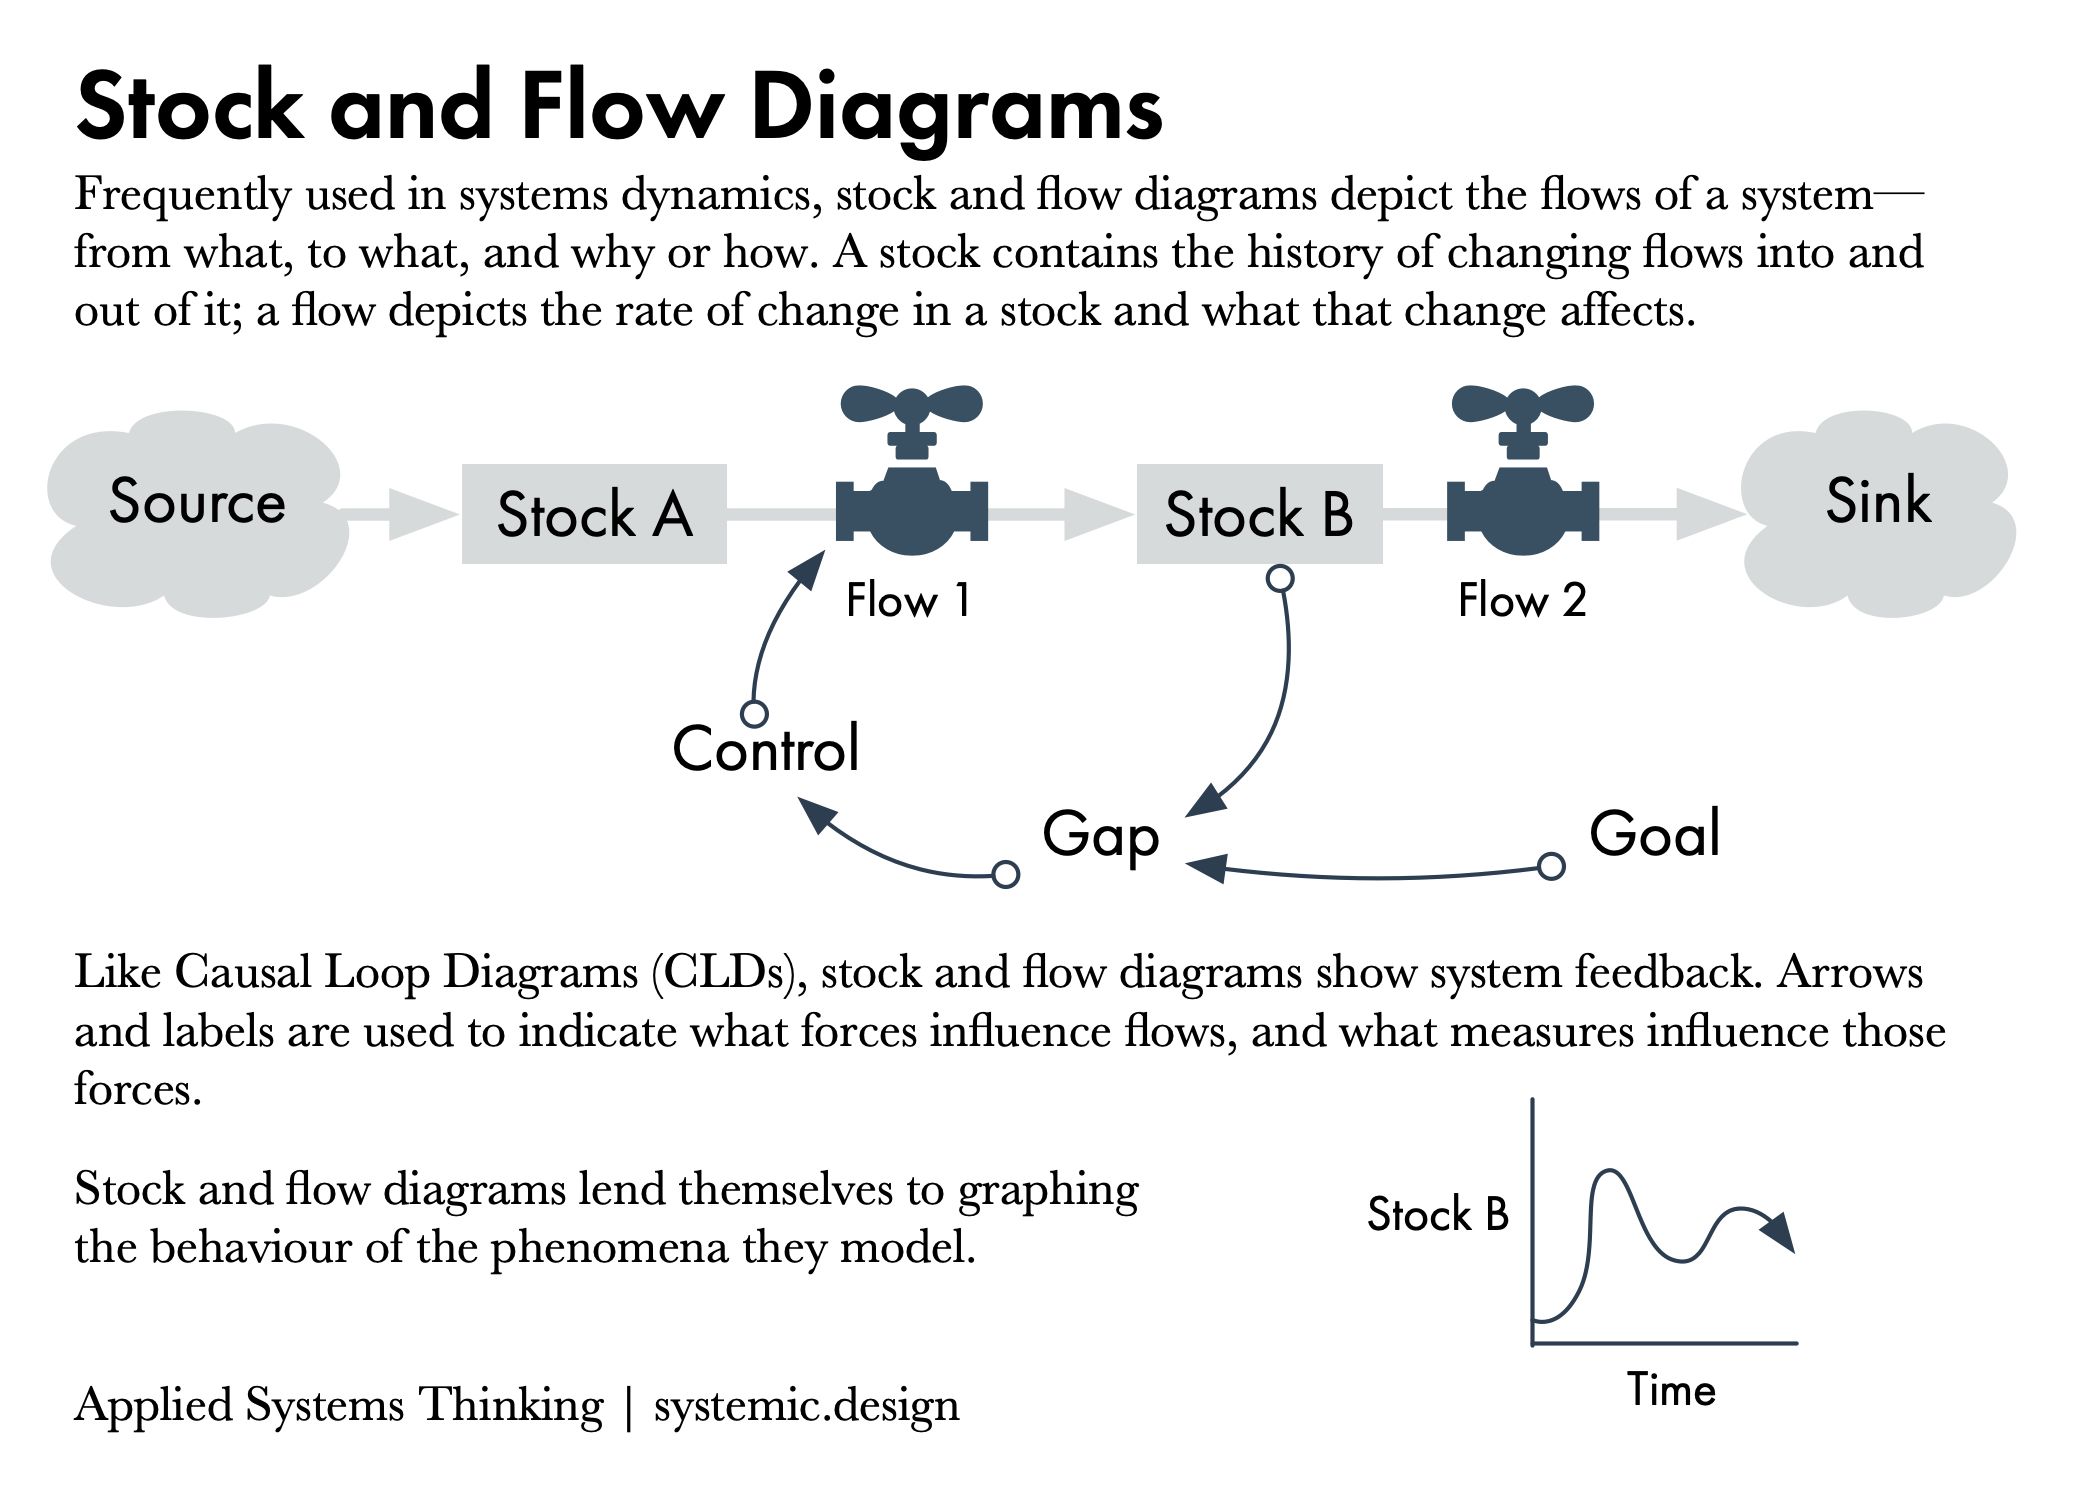 Stock and Flow Diagrams